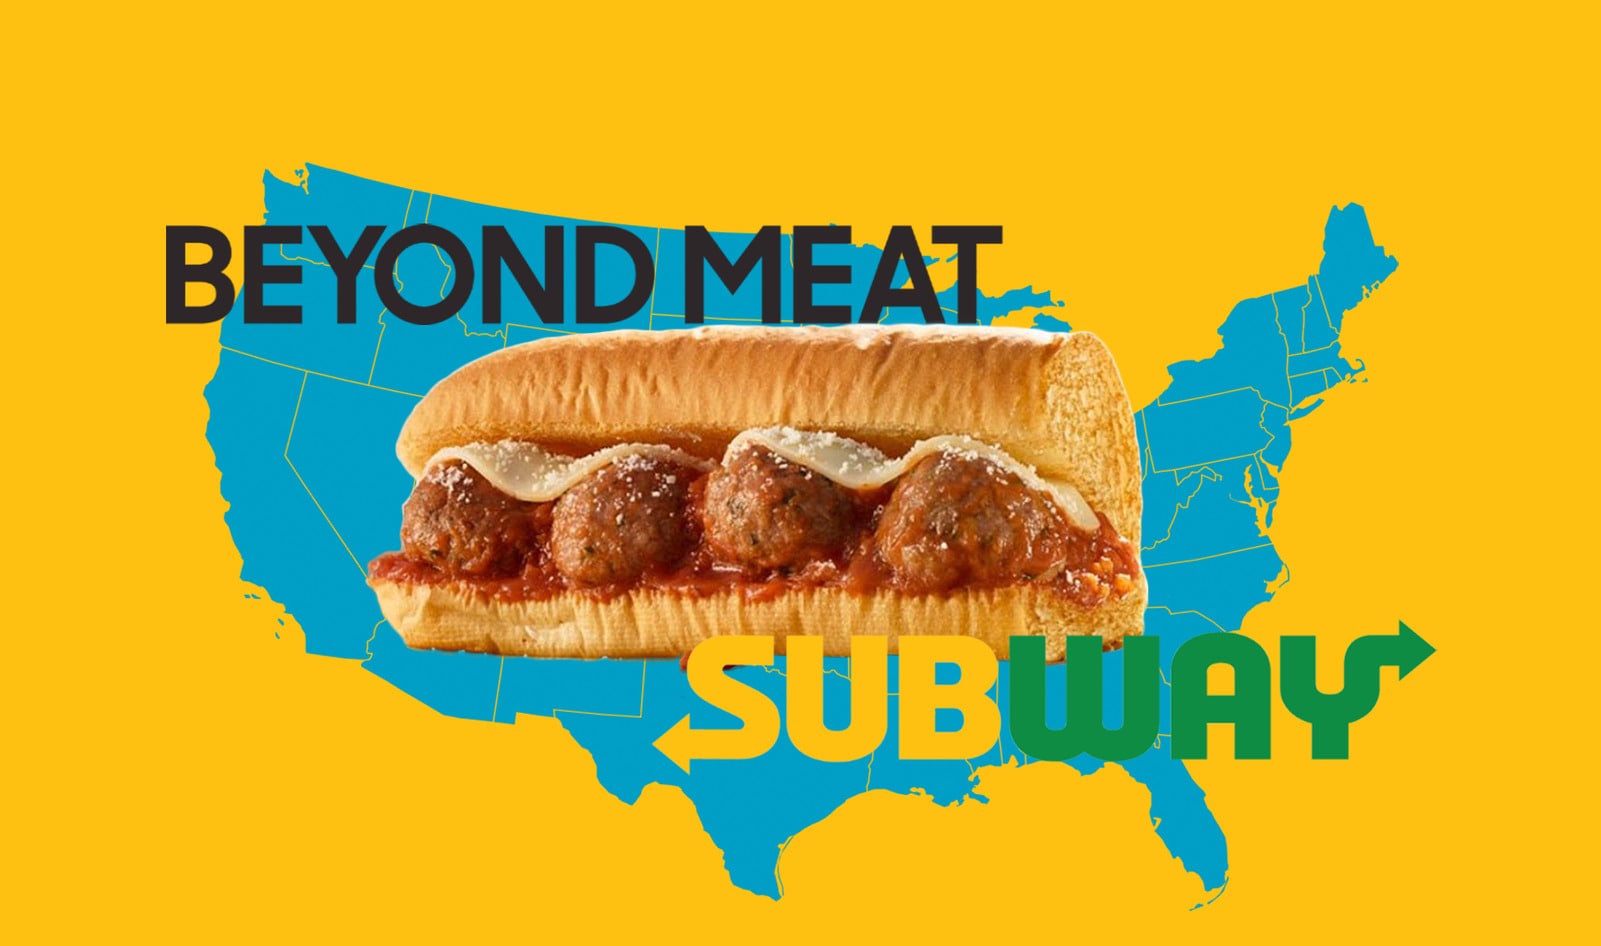 Subway Reveals Exactly Where to Get the Beyond Meatball Sub